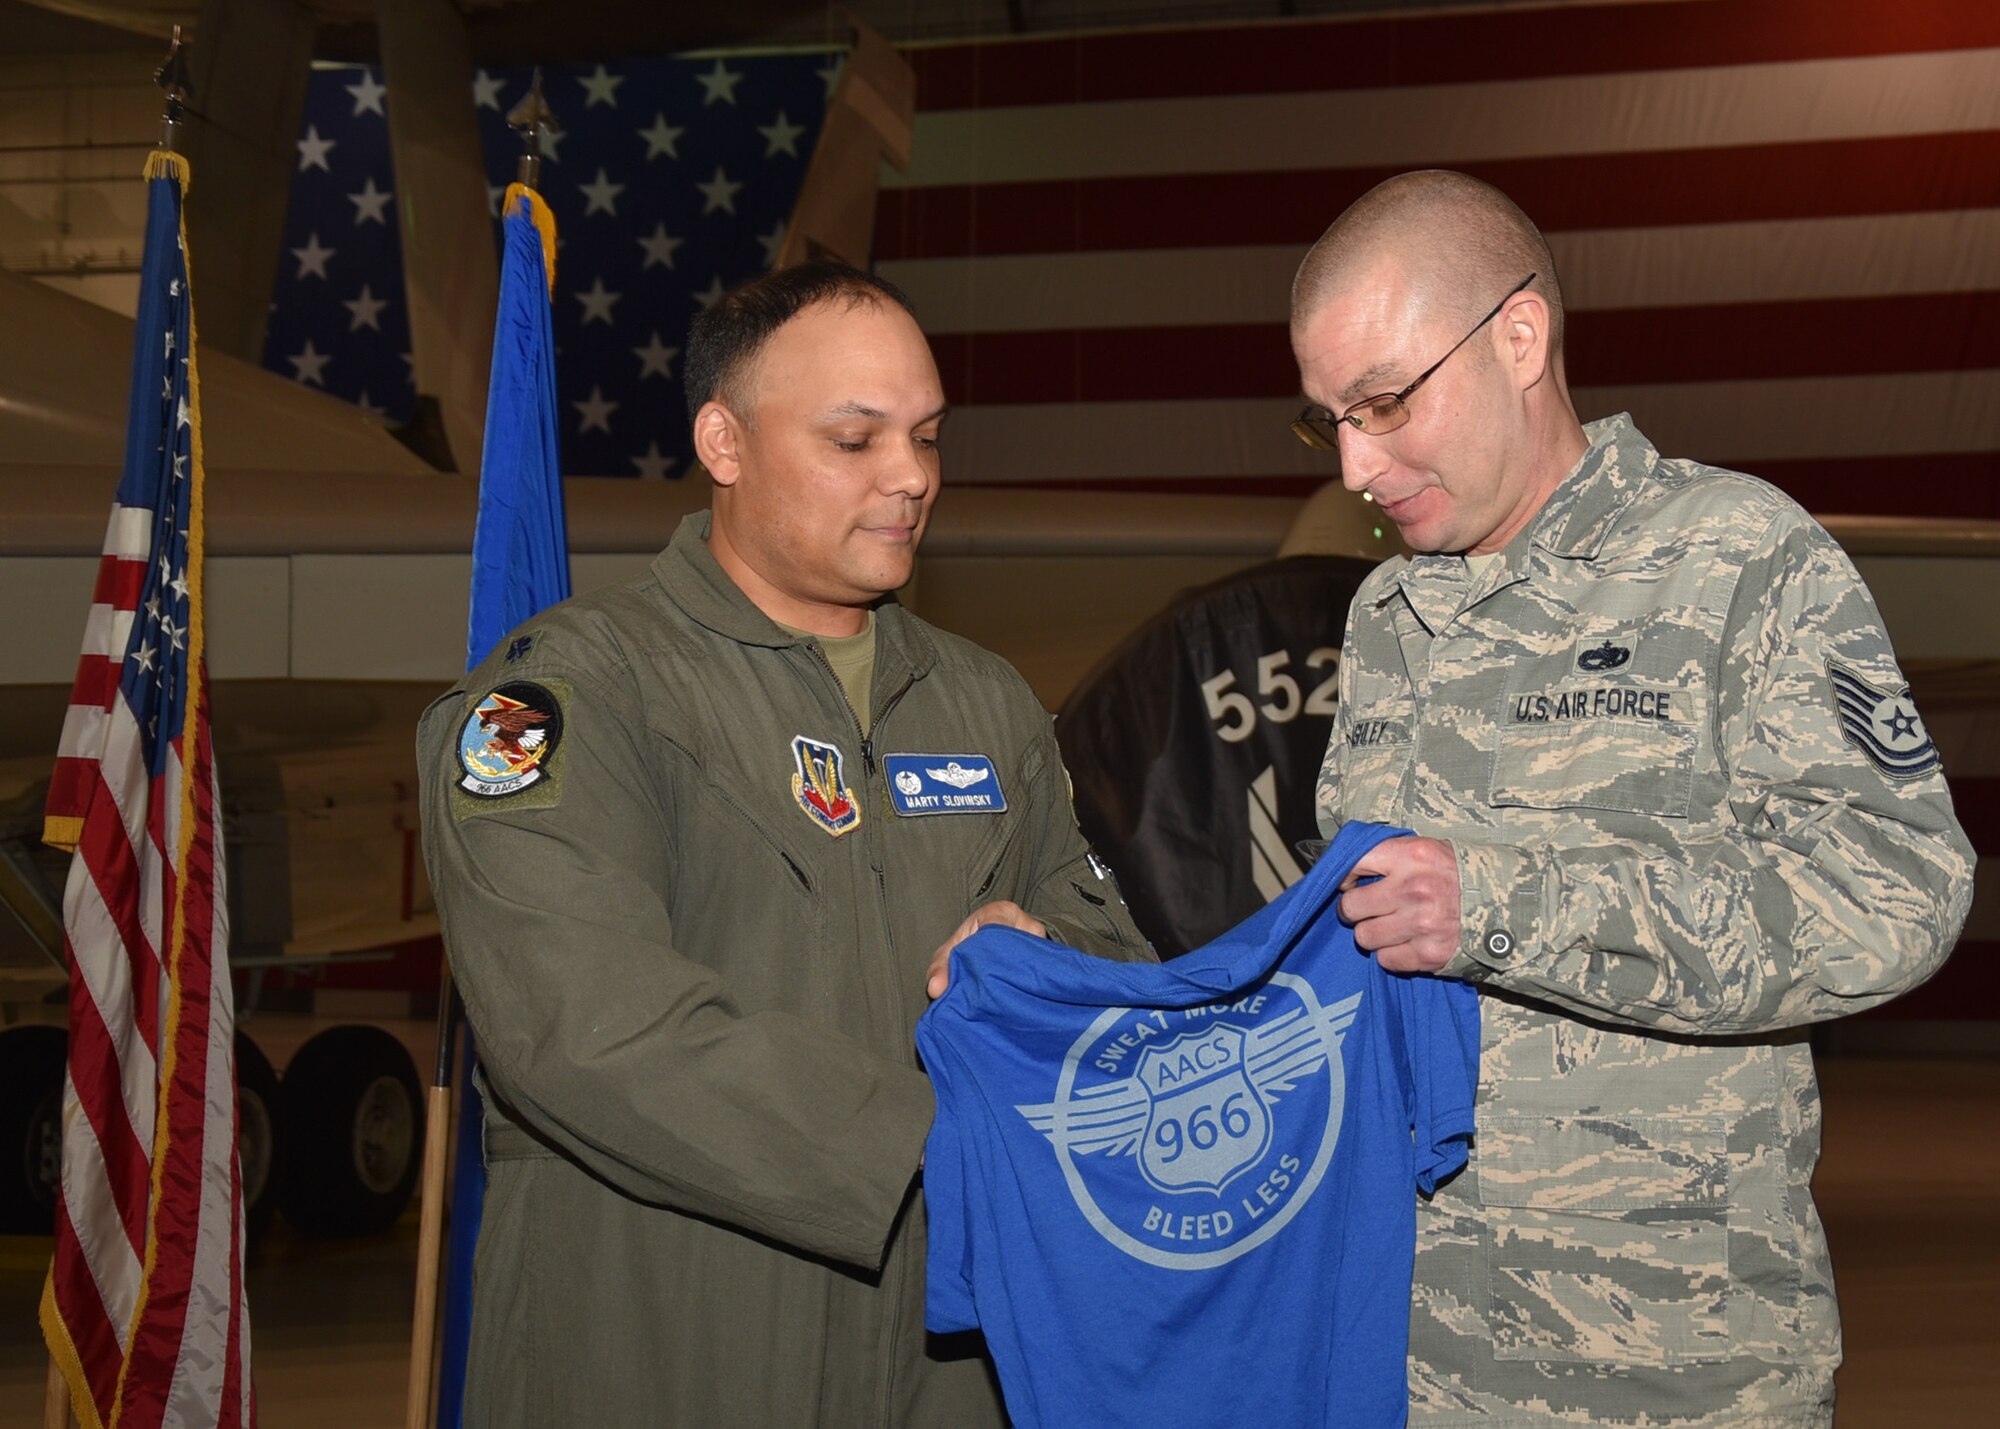 Lt. Col. Marty Slovinsky, 966th Airborne Air Control Squadron, Commander, presents a squadron morale T-shirt and commander’s coin to Tech. Sgt. Clinton Ashley, 552nd Maintenance Squadron during an E-3 Sentry aircraft dedication ceremony held Jan. 6, 2020 in Dock 2 of Bldg. 230. The ceremony marked the first time that an E-3 Sentry aircraft has been dedicated to the 966th AACS and will help forge a bond between aircrews and maintainers.

(Air Force photo/Ron Mullan